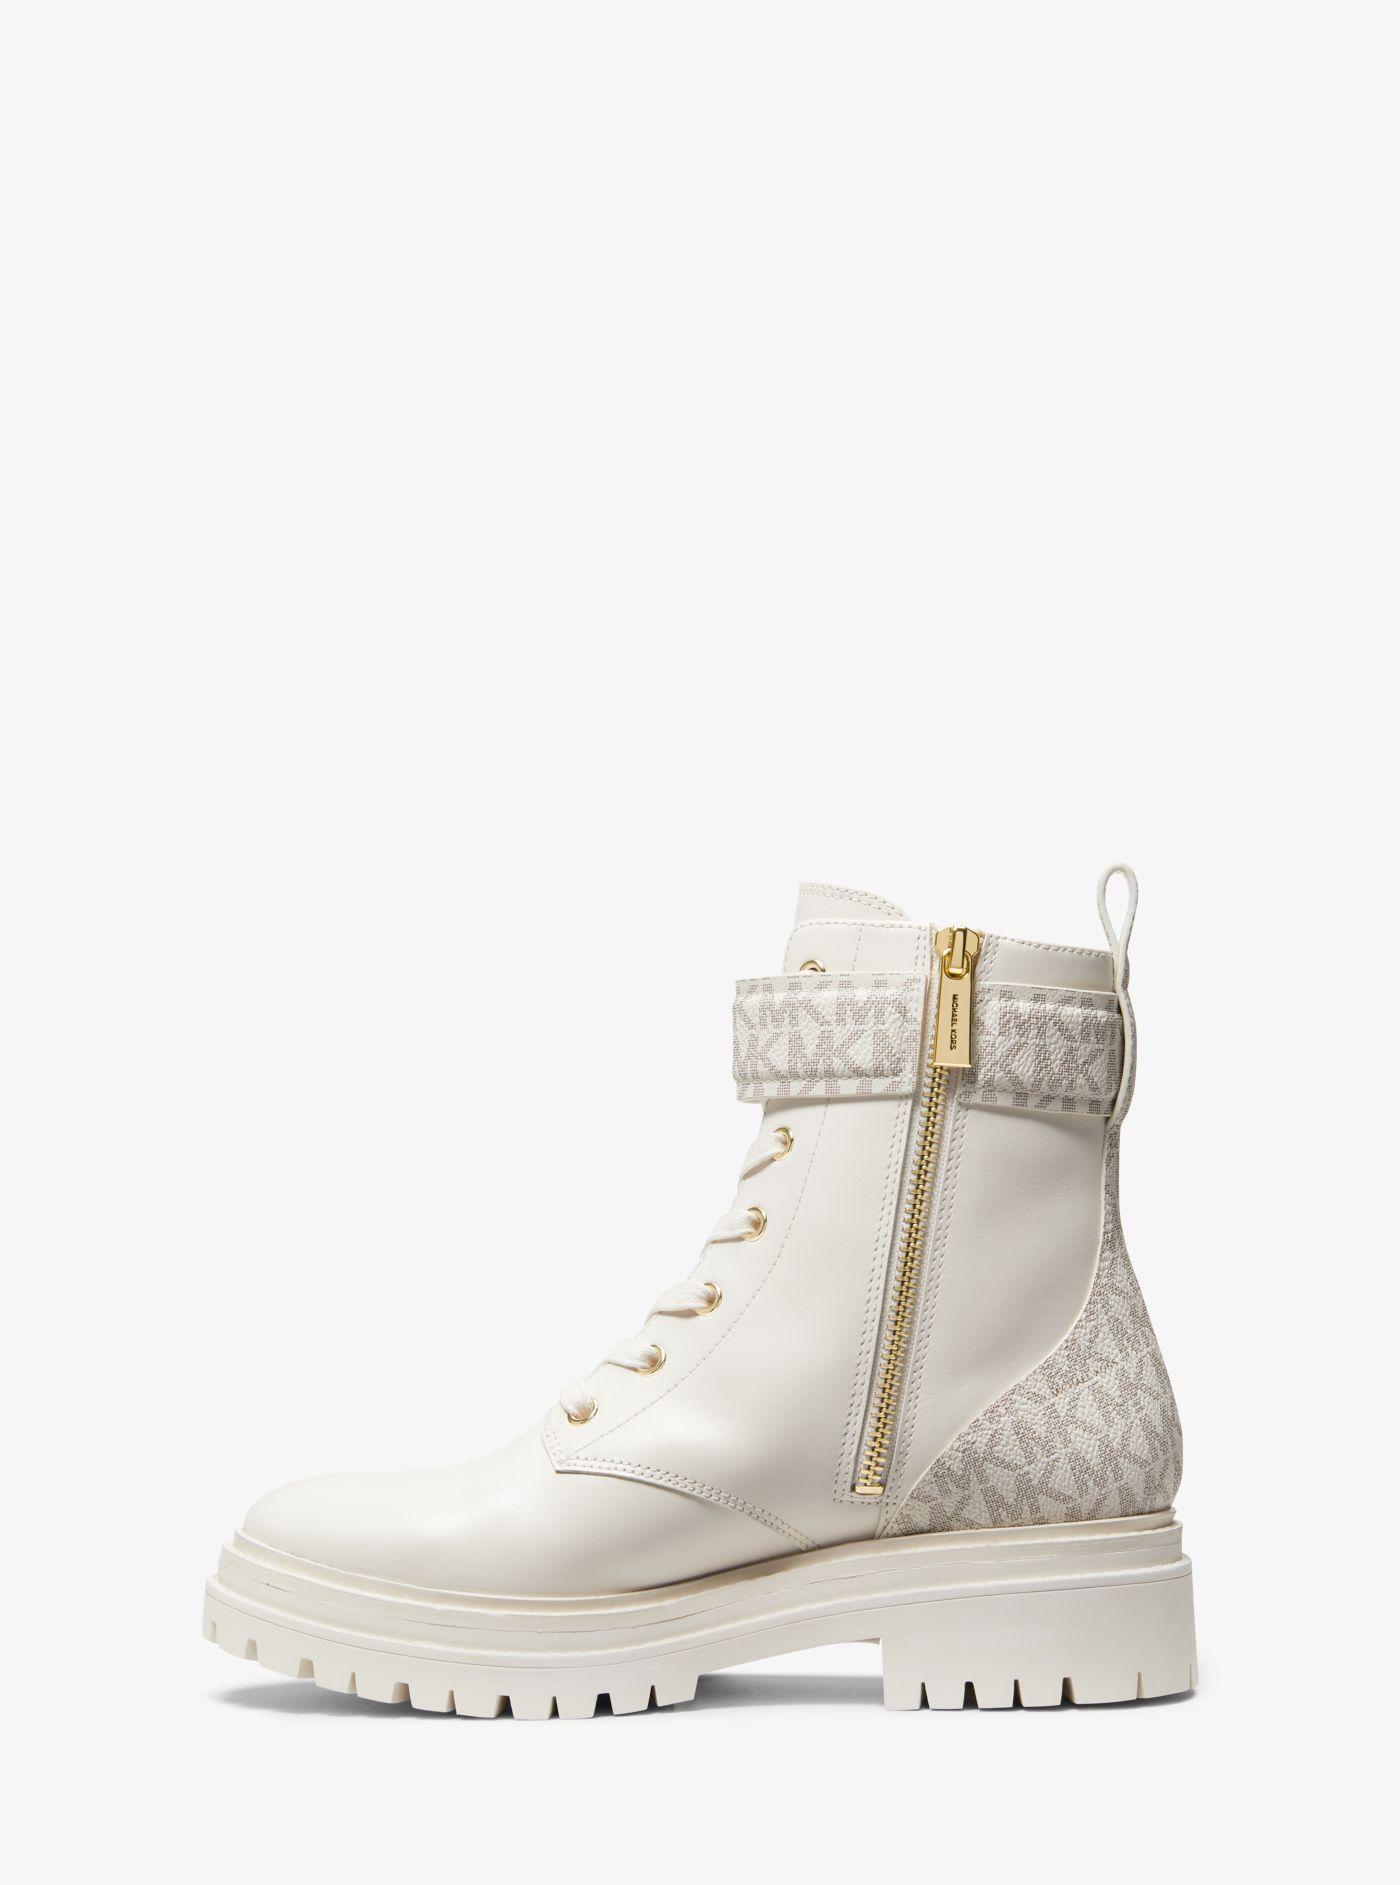 Michael Kors Parker Leather Combat Boot in White | Lyst